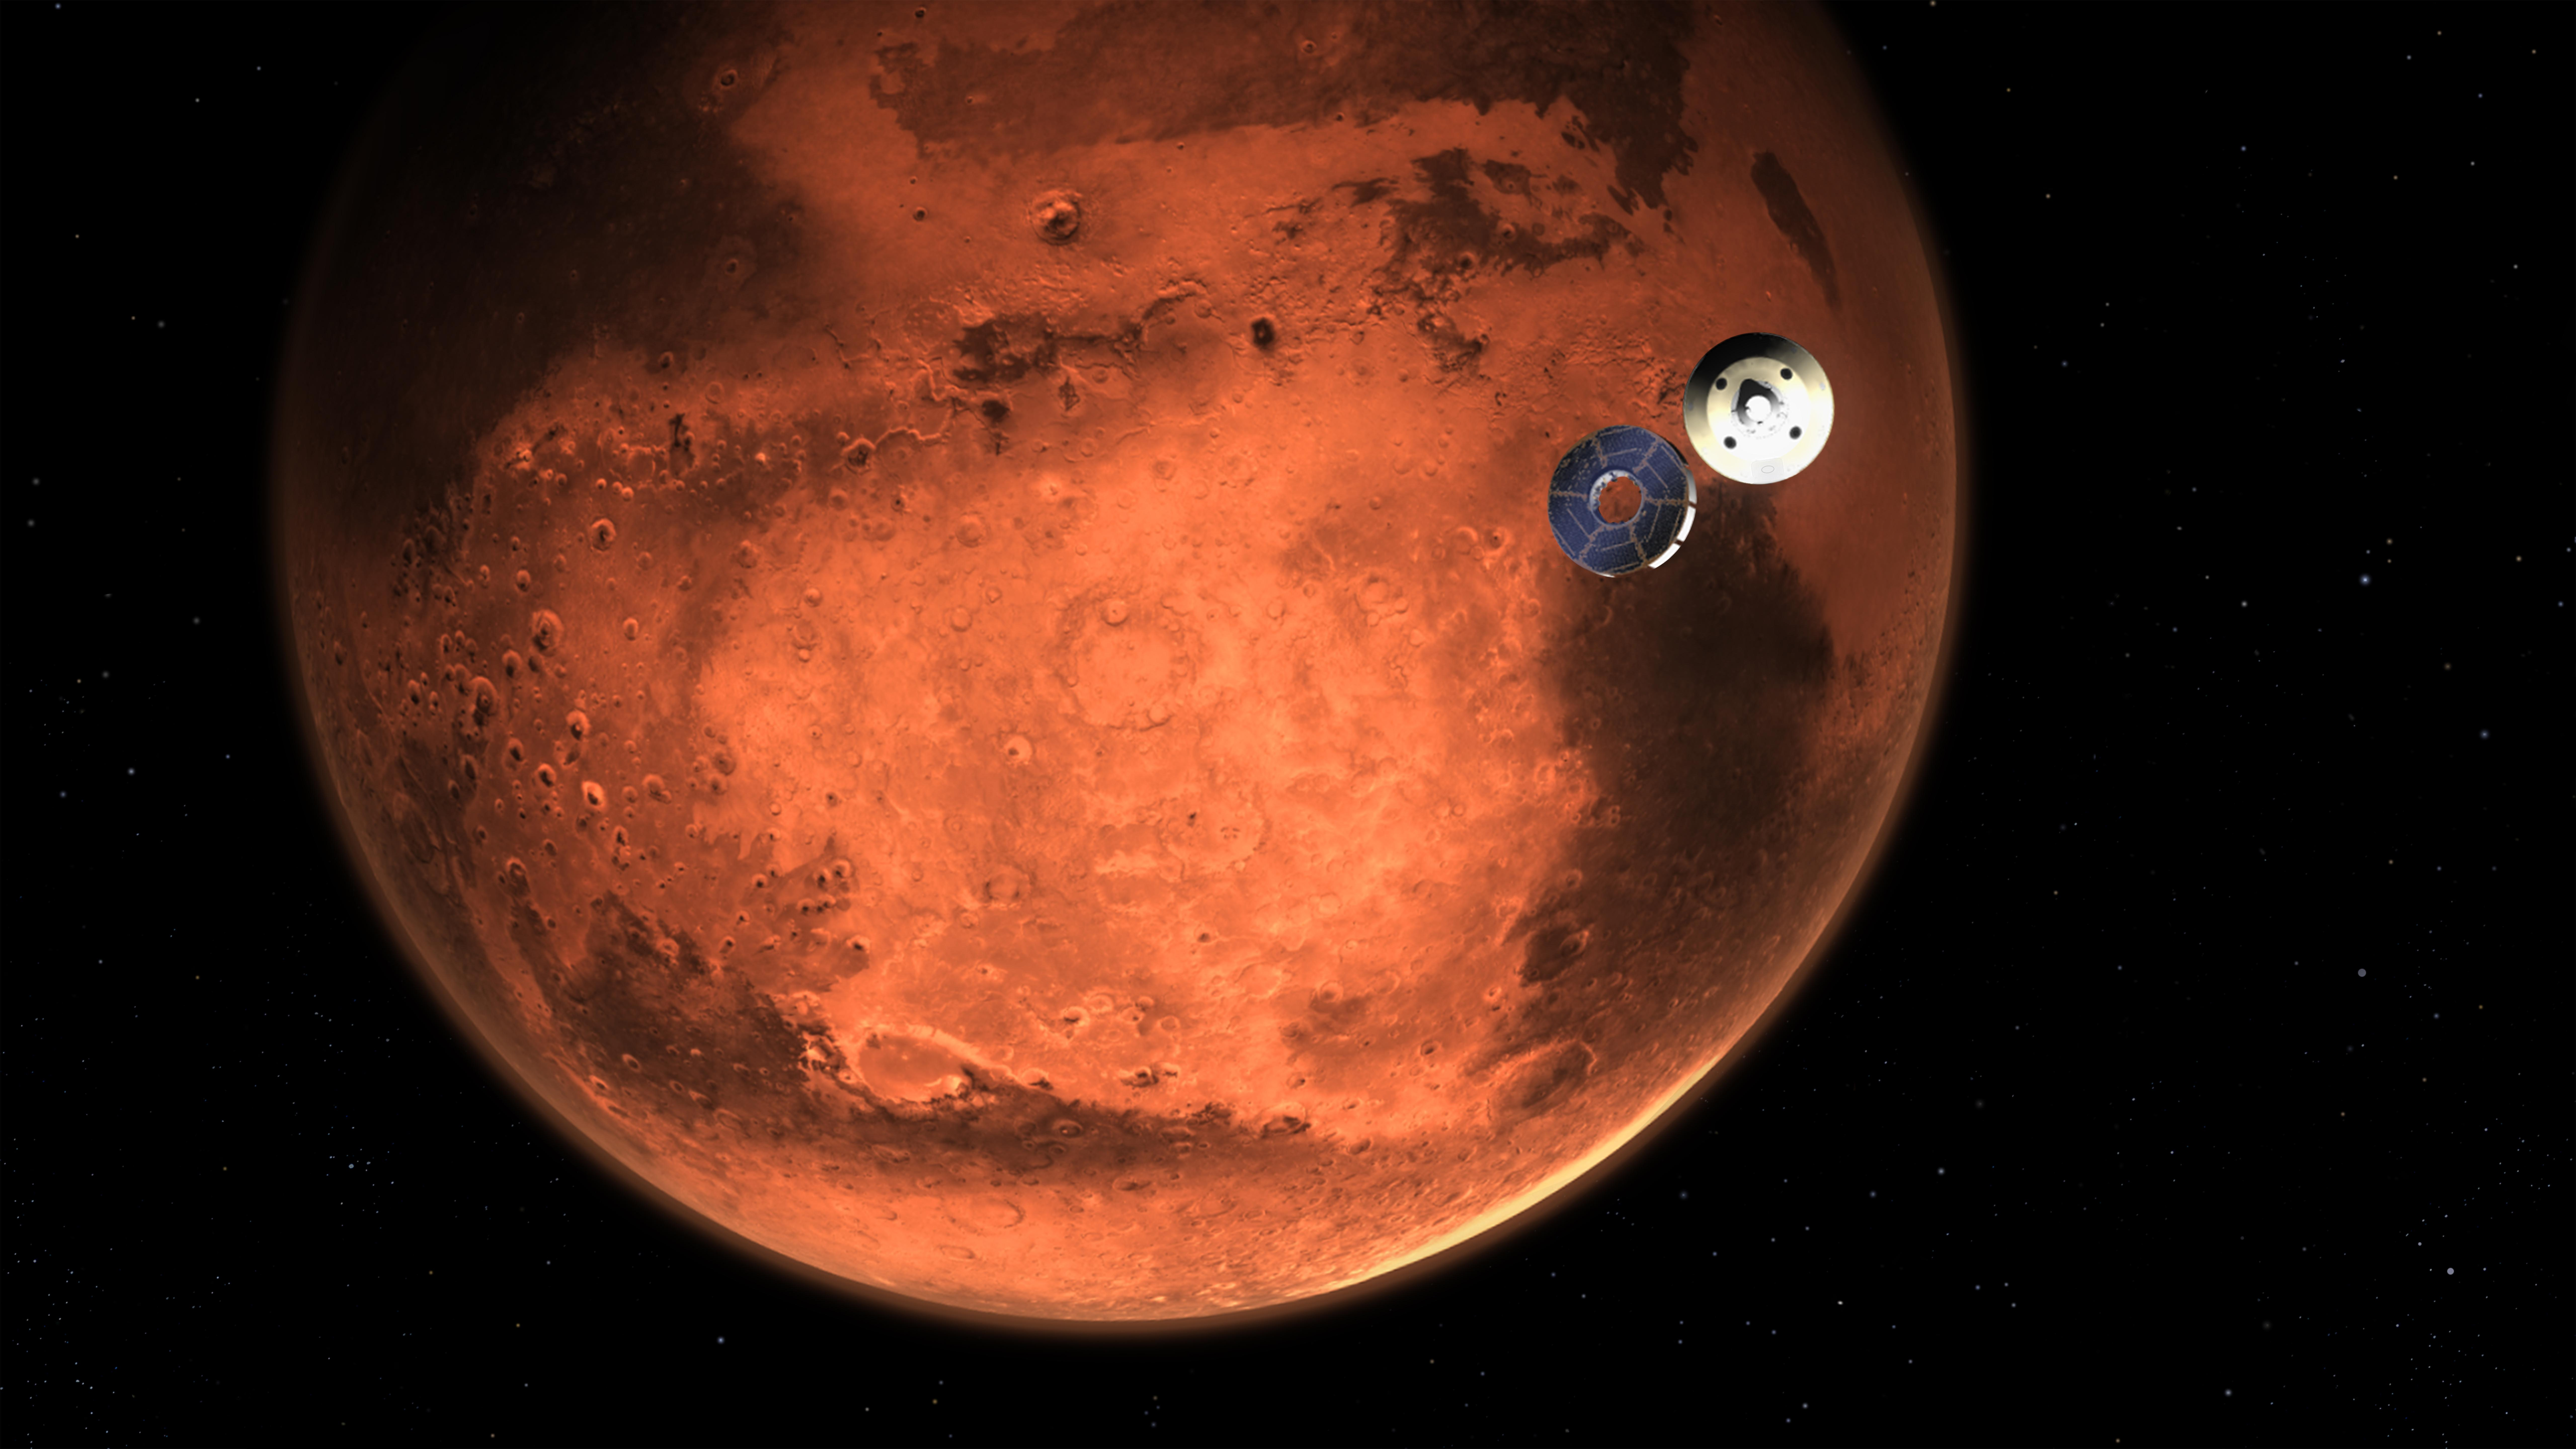 PIA24312: Perseverance Rover's Cruise Stage Separates (Illustration)